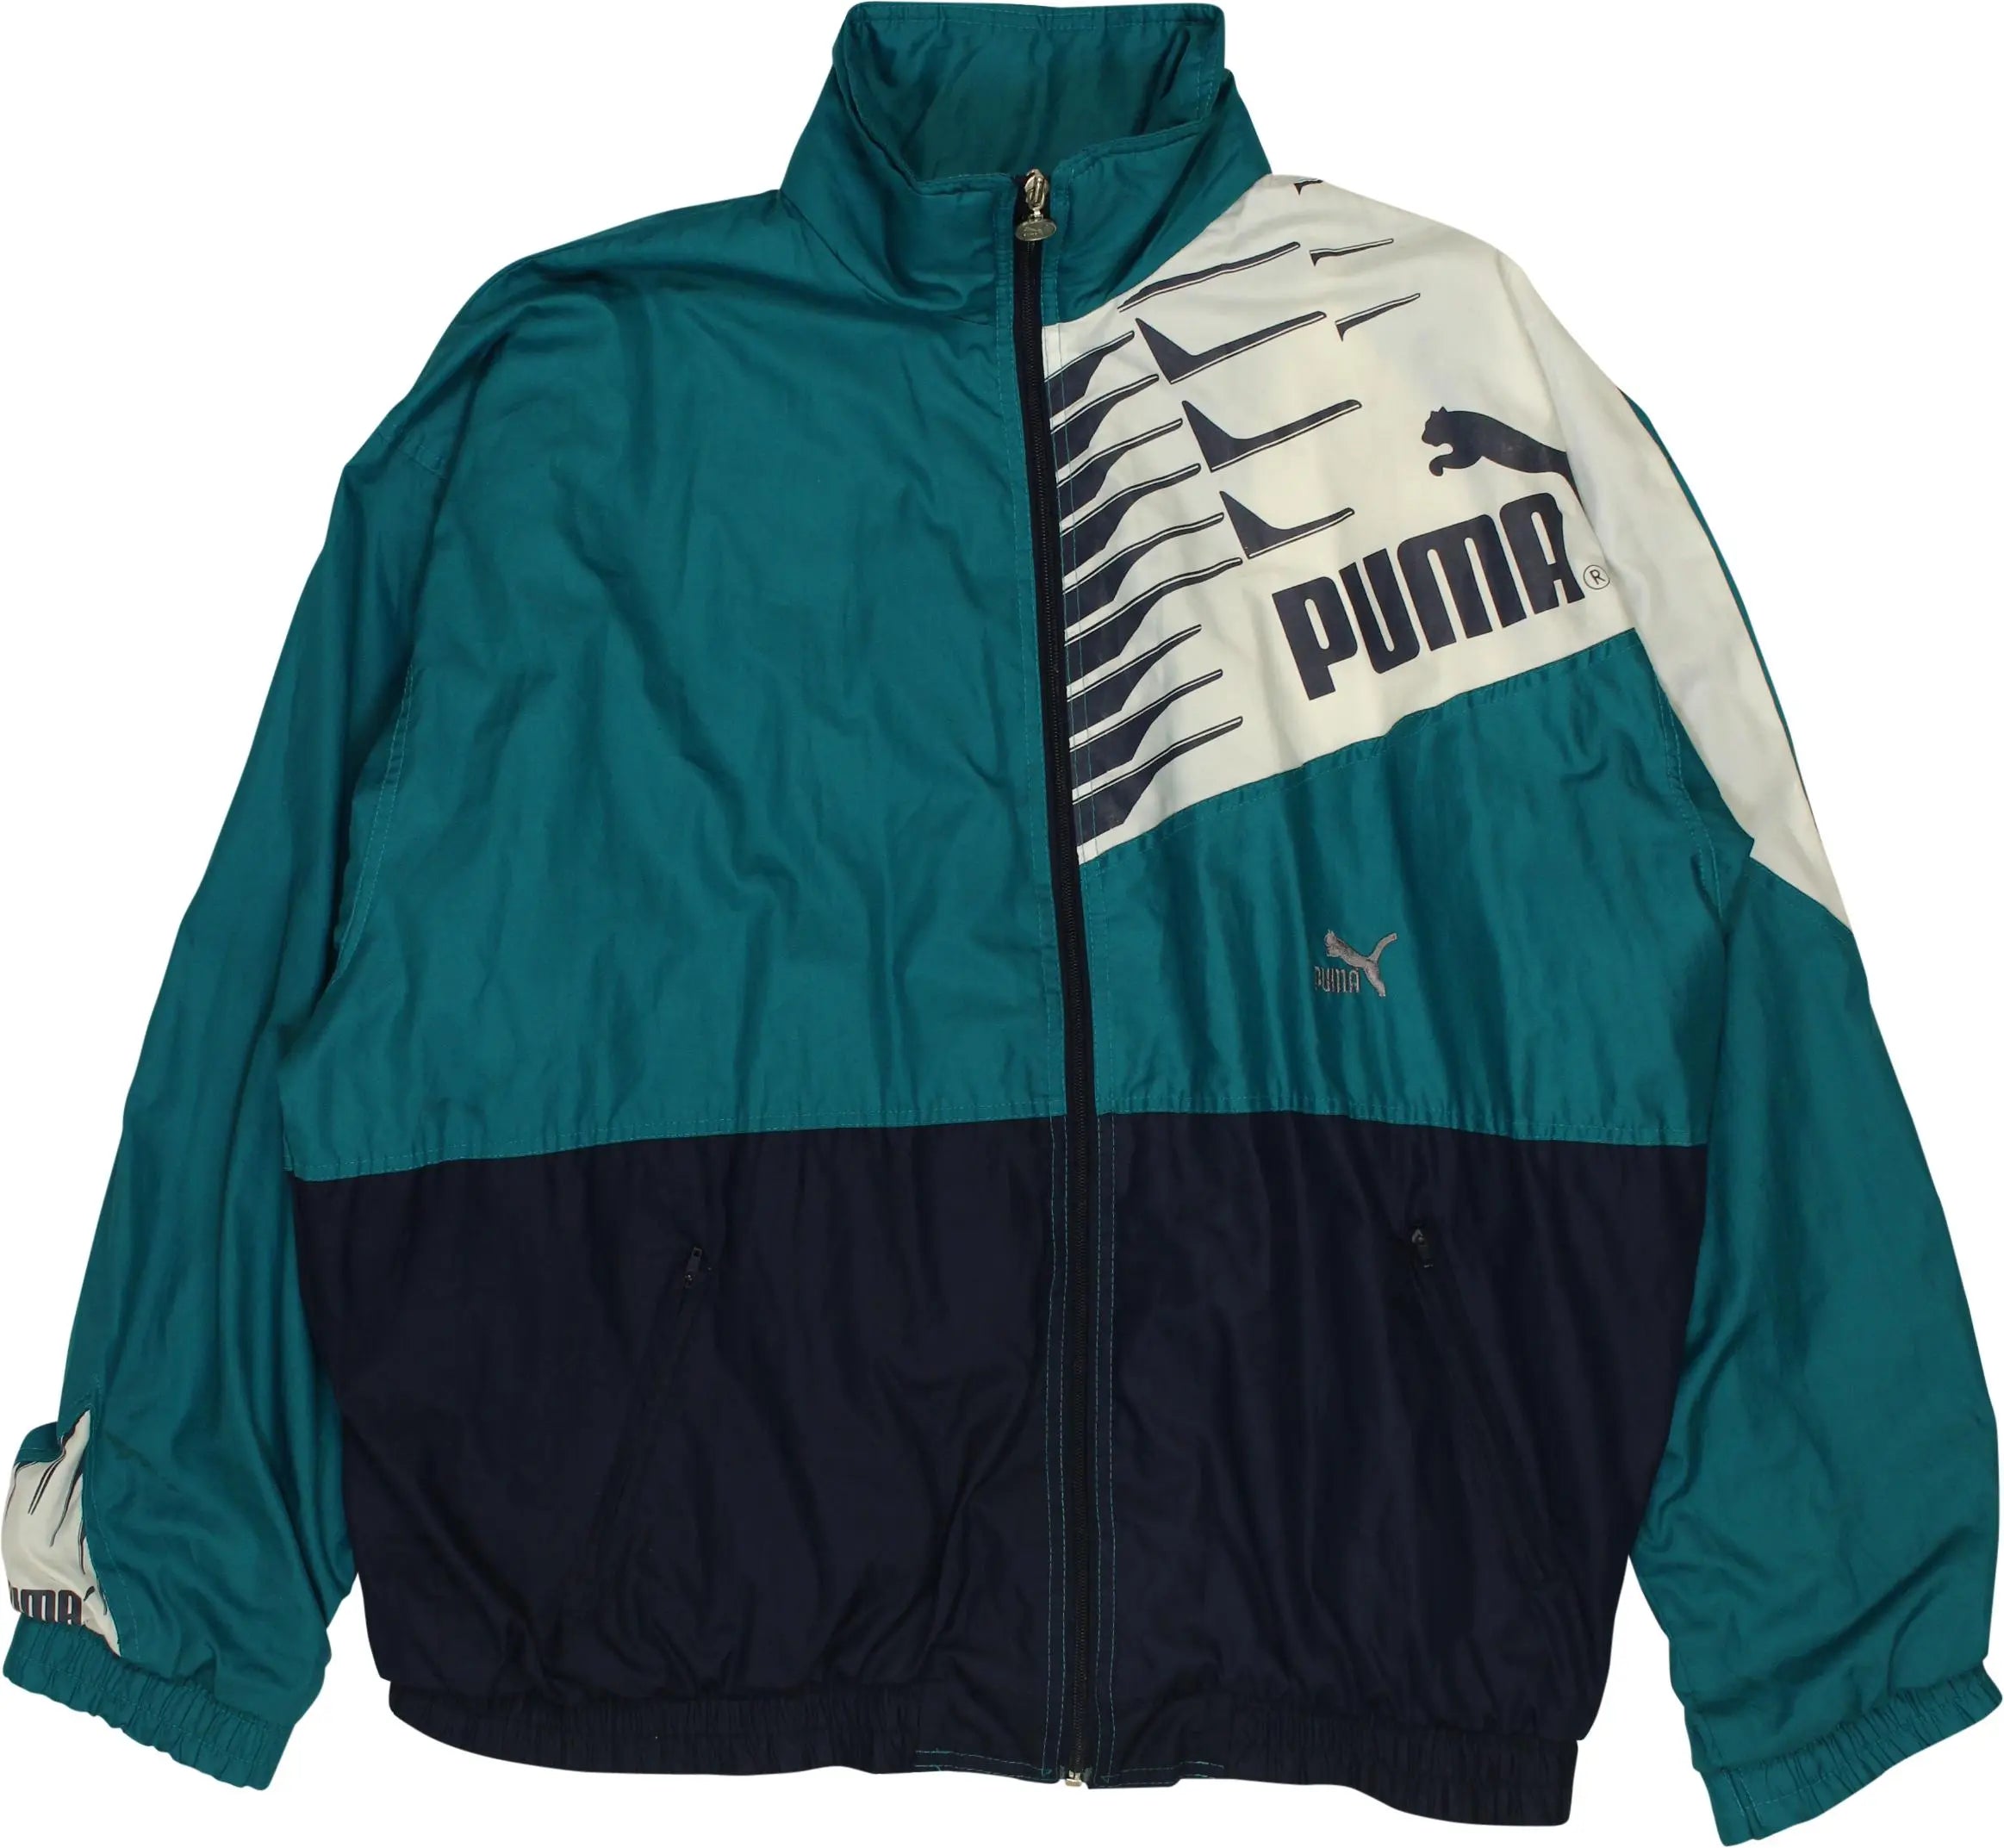 Pre-owned and vintage Puma